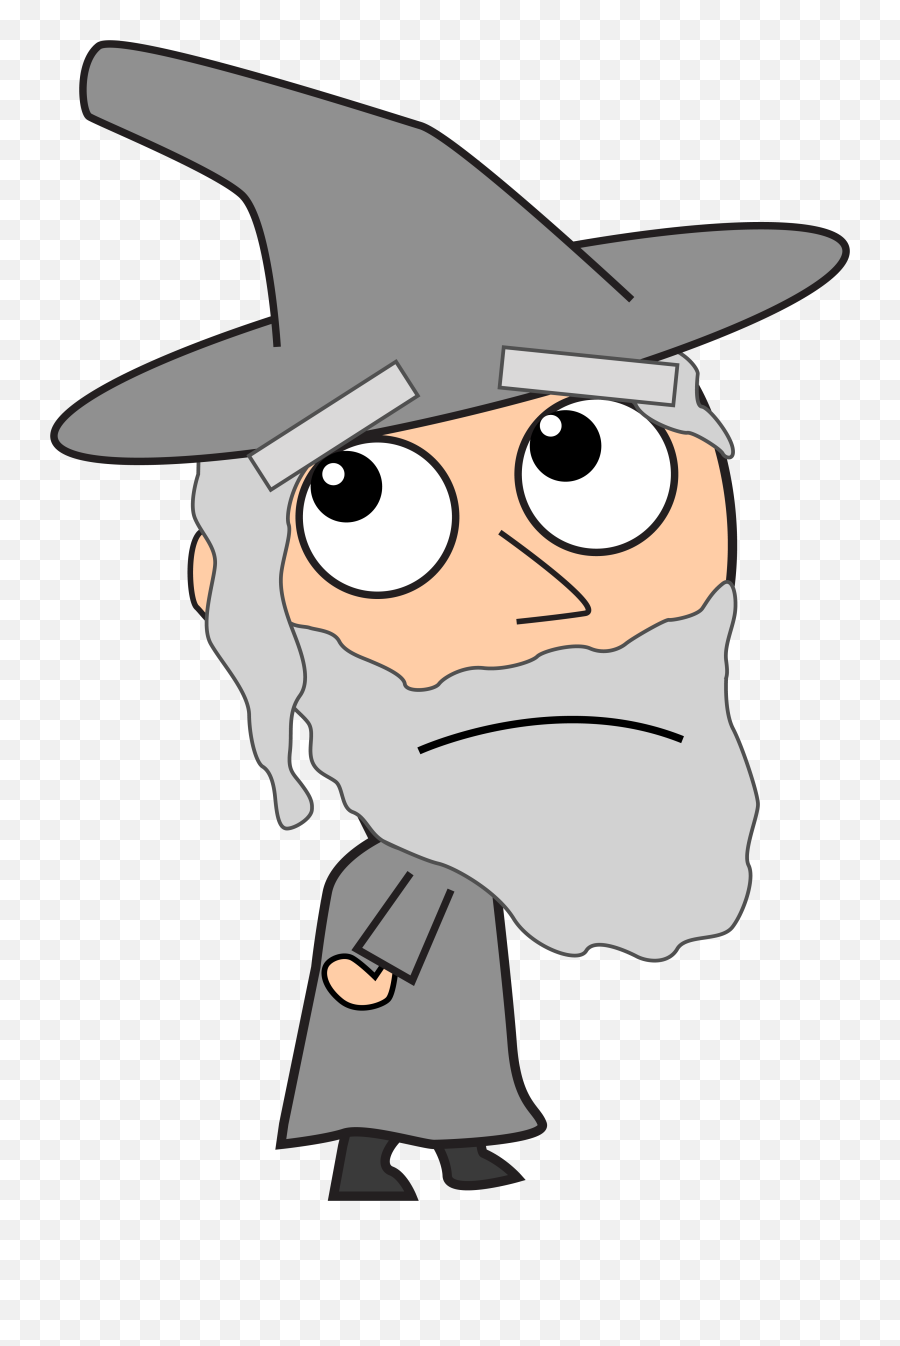 Gandalf Hat Png - To Illustrate The Simple Difference Emoji,Cartoon Hat Png